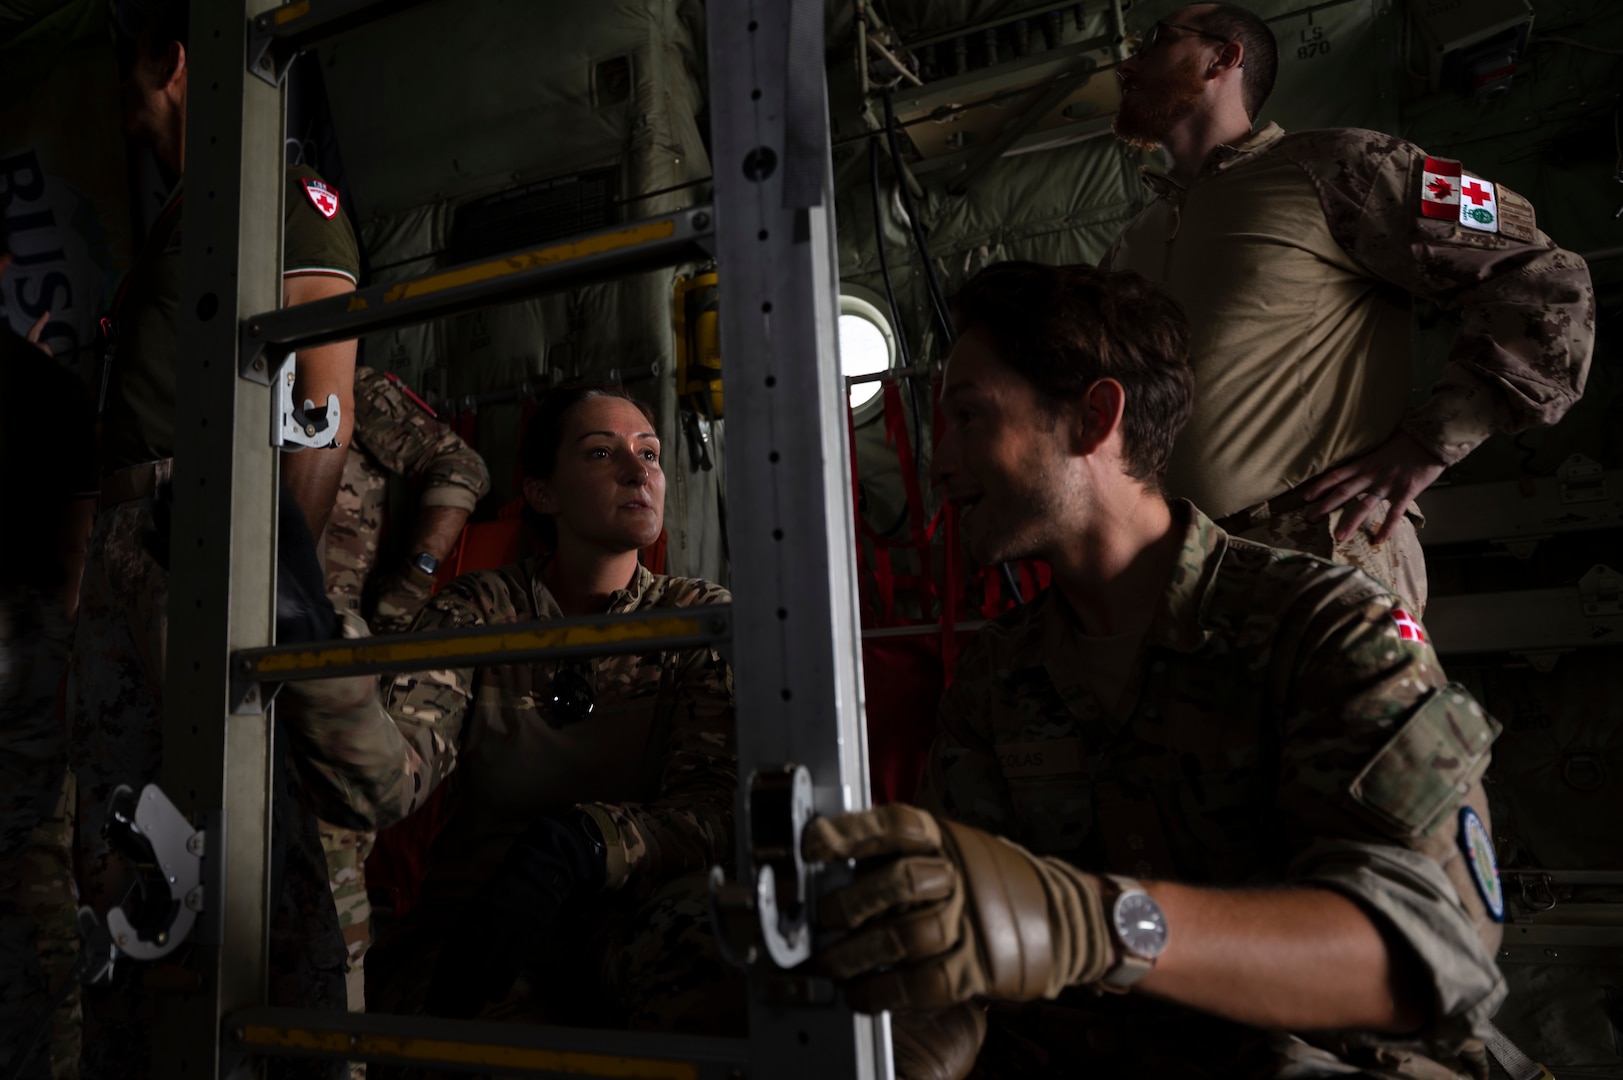 From left, U.S. Air Force Capt. Jessica Douglas, 405th Expeditionary Aeromedical Evacuation Squadron flight nurse, assists Danish, Canadian and Italian coalition partners in setting up stanchions inside a C-130J Super Hercules aircraft during a coalition training exercise at Ali Al Salem Air Base, Kuwait, July 29, 2022. These stanchions allow for patients to be stacked vertically on stretchers saving on aircraft space when needed to transport patients. (U.S. Air Force photo by Staff Sgt. Dalton Williams)